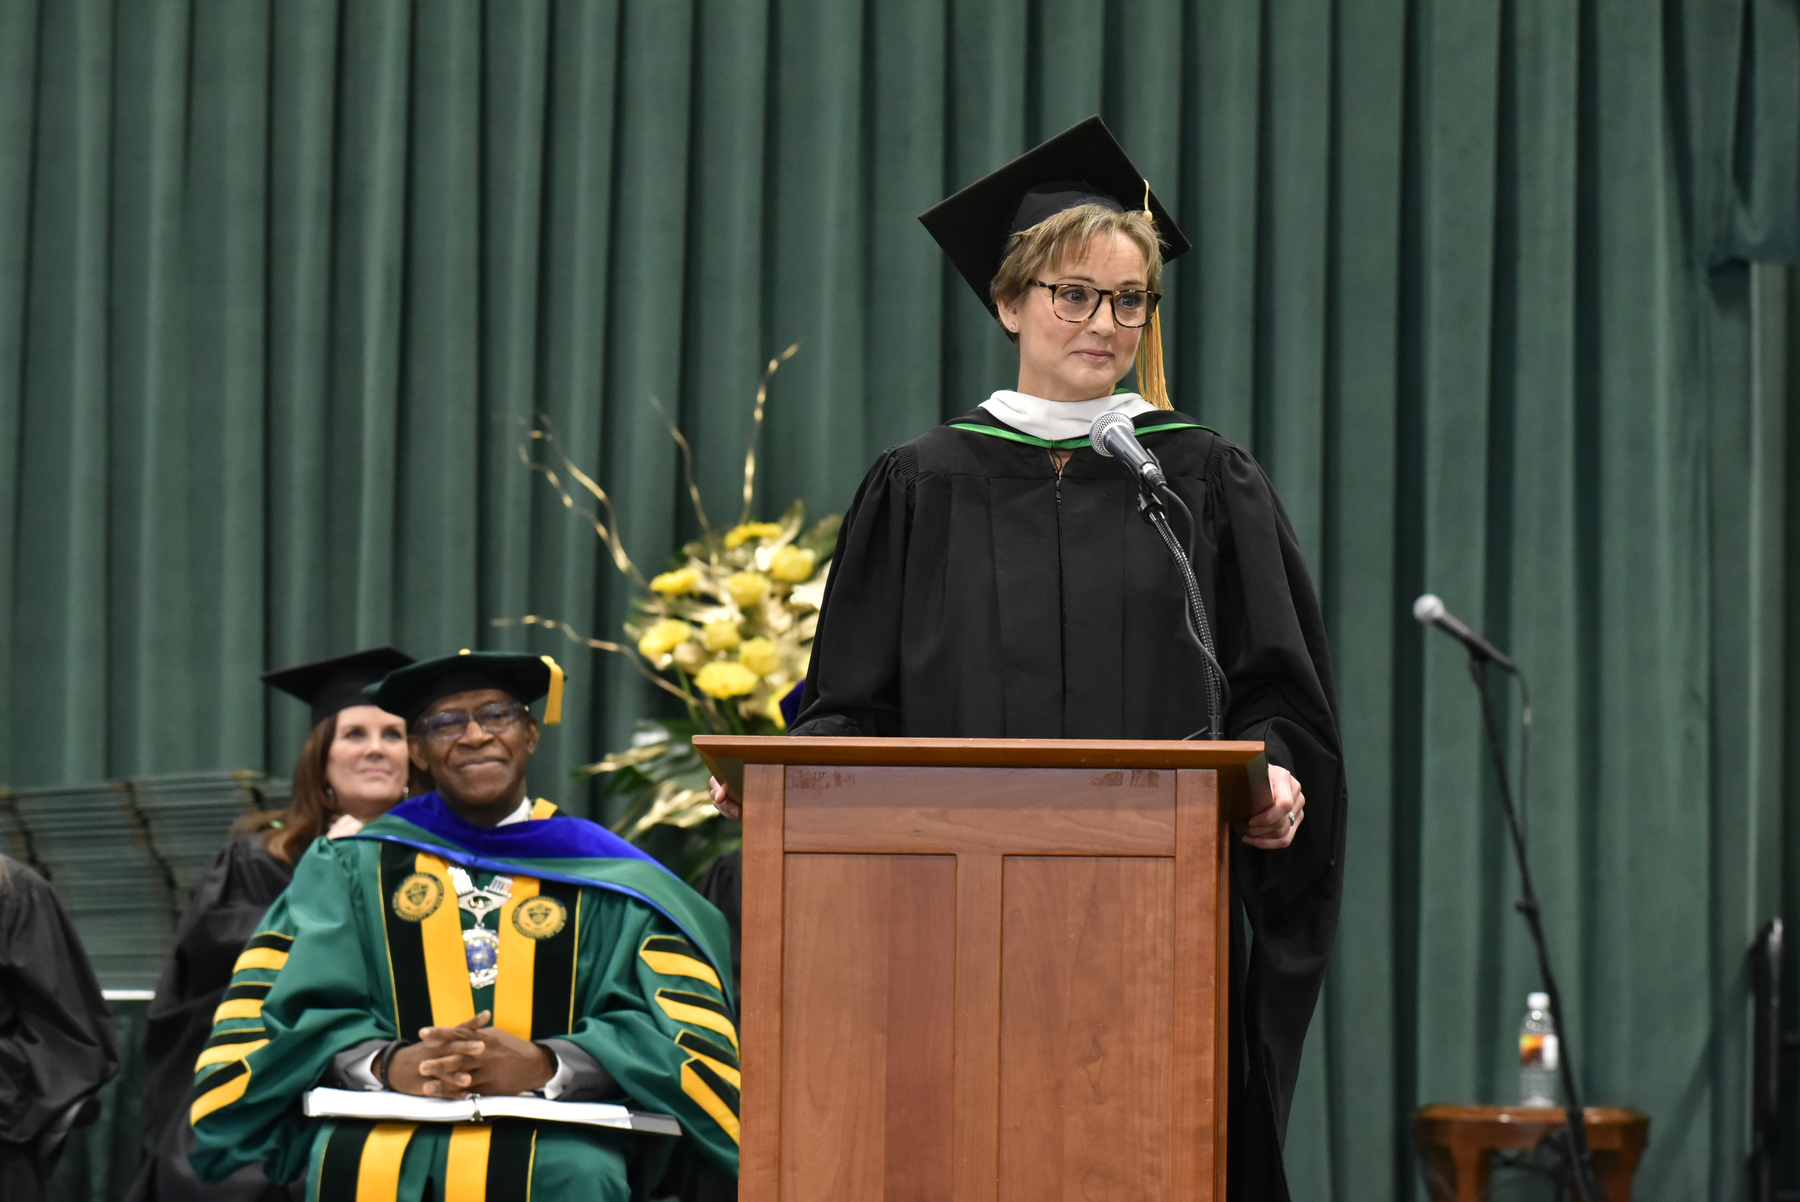 College Council member Tara FitzGibbons, a 1994 alumna of the university, greets the graduates during the Dec. 16 Commencement ceremony.